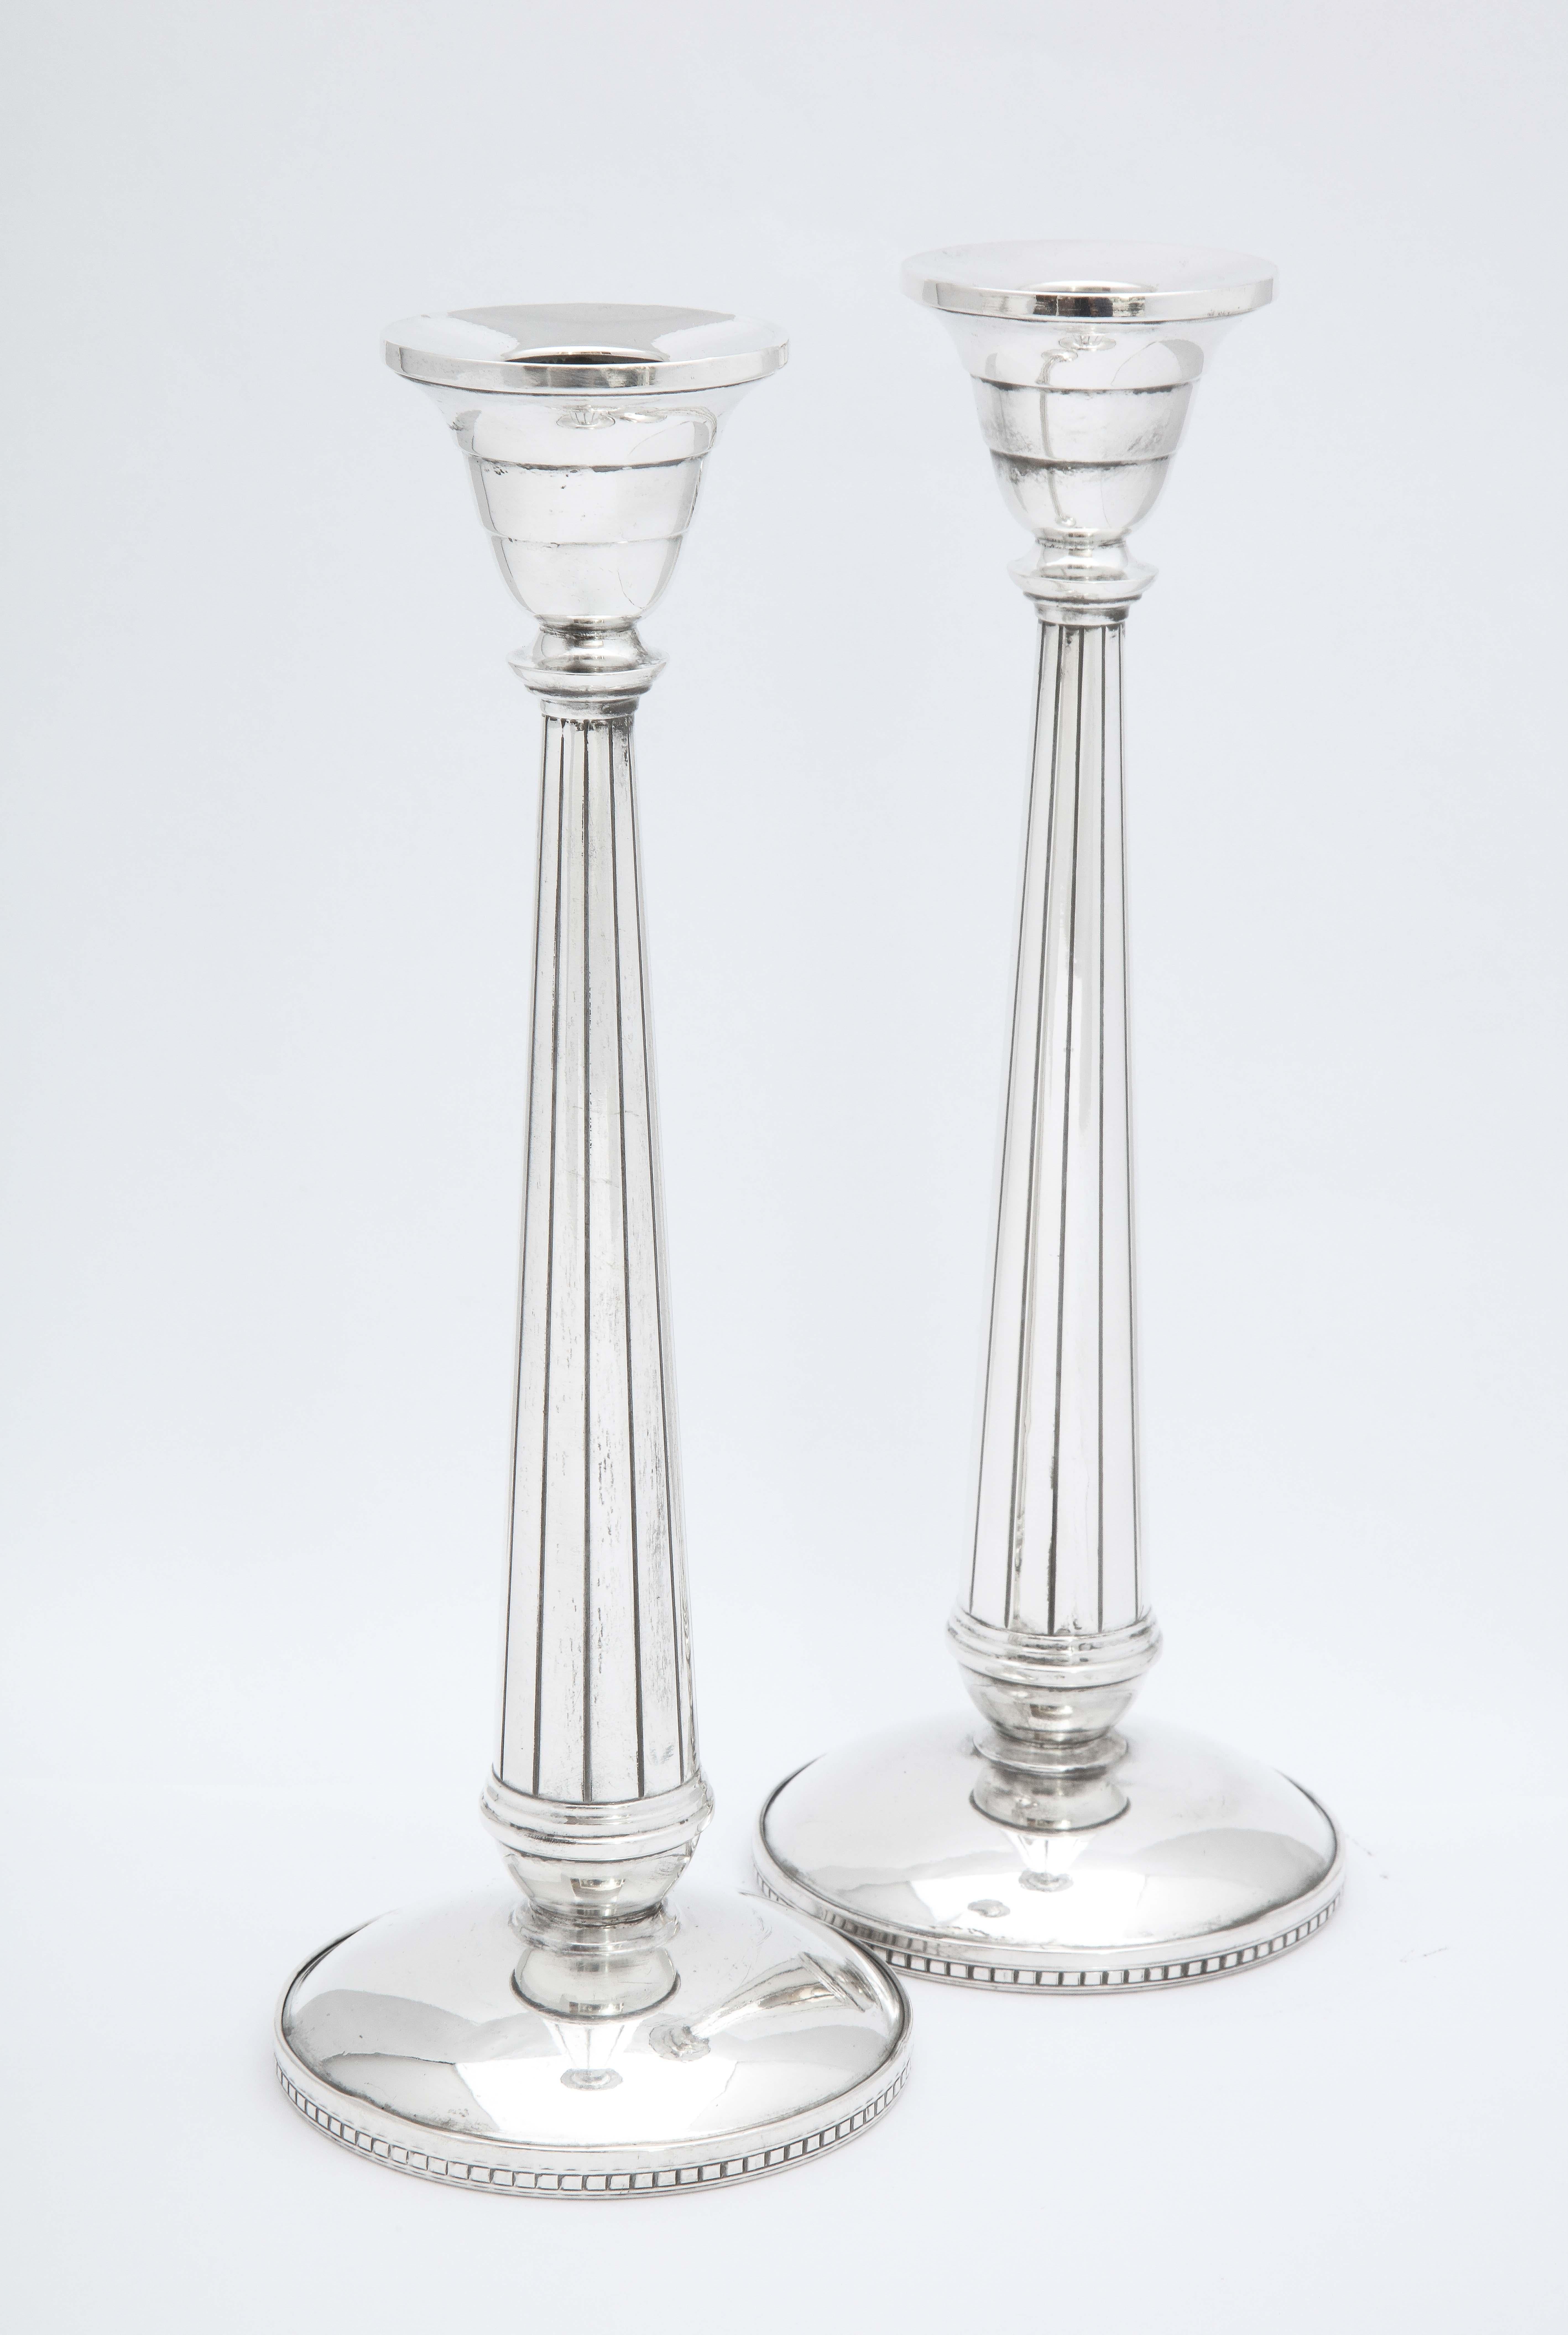 Pair of Art Deco, tall sterling silver candlesticks, The Webster Silver Corp., North Attleboro, Mass., Ca. 1930's. Each candlestick measures 9 inches high x almost 3 3/4 inches diameter across its base x 2 inches diameter across candle cup. Some